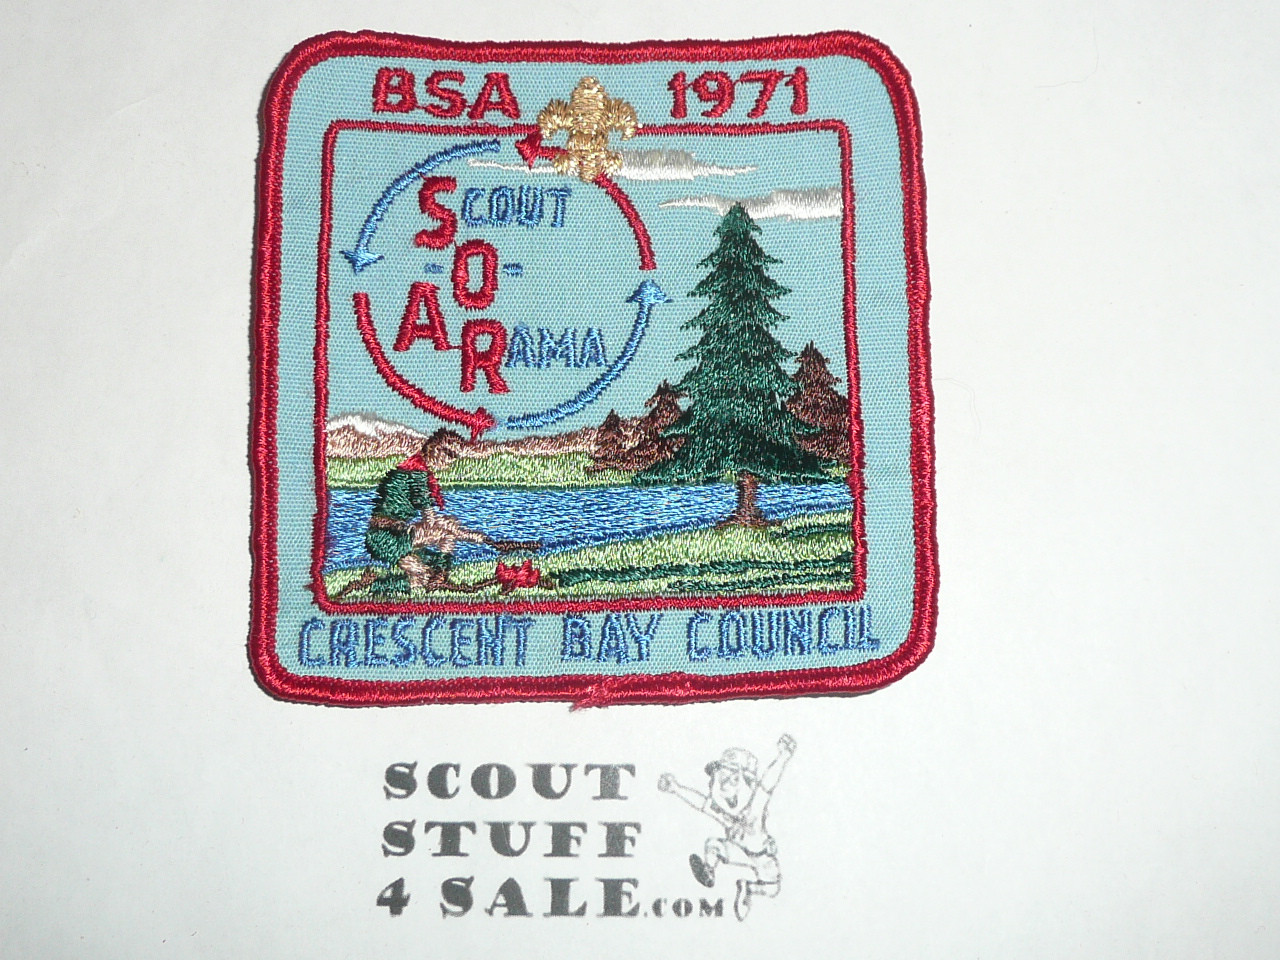 Crescent Bay Area Council, 1971 Scout-o-rama Patch